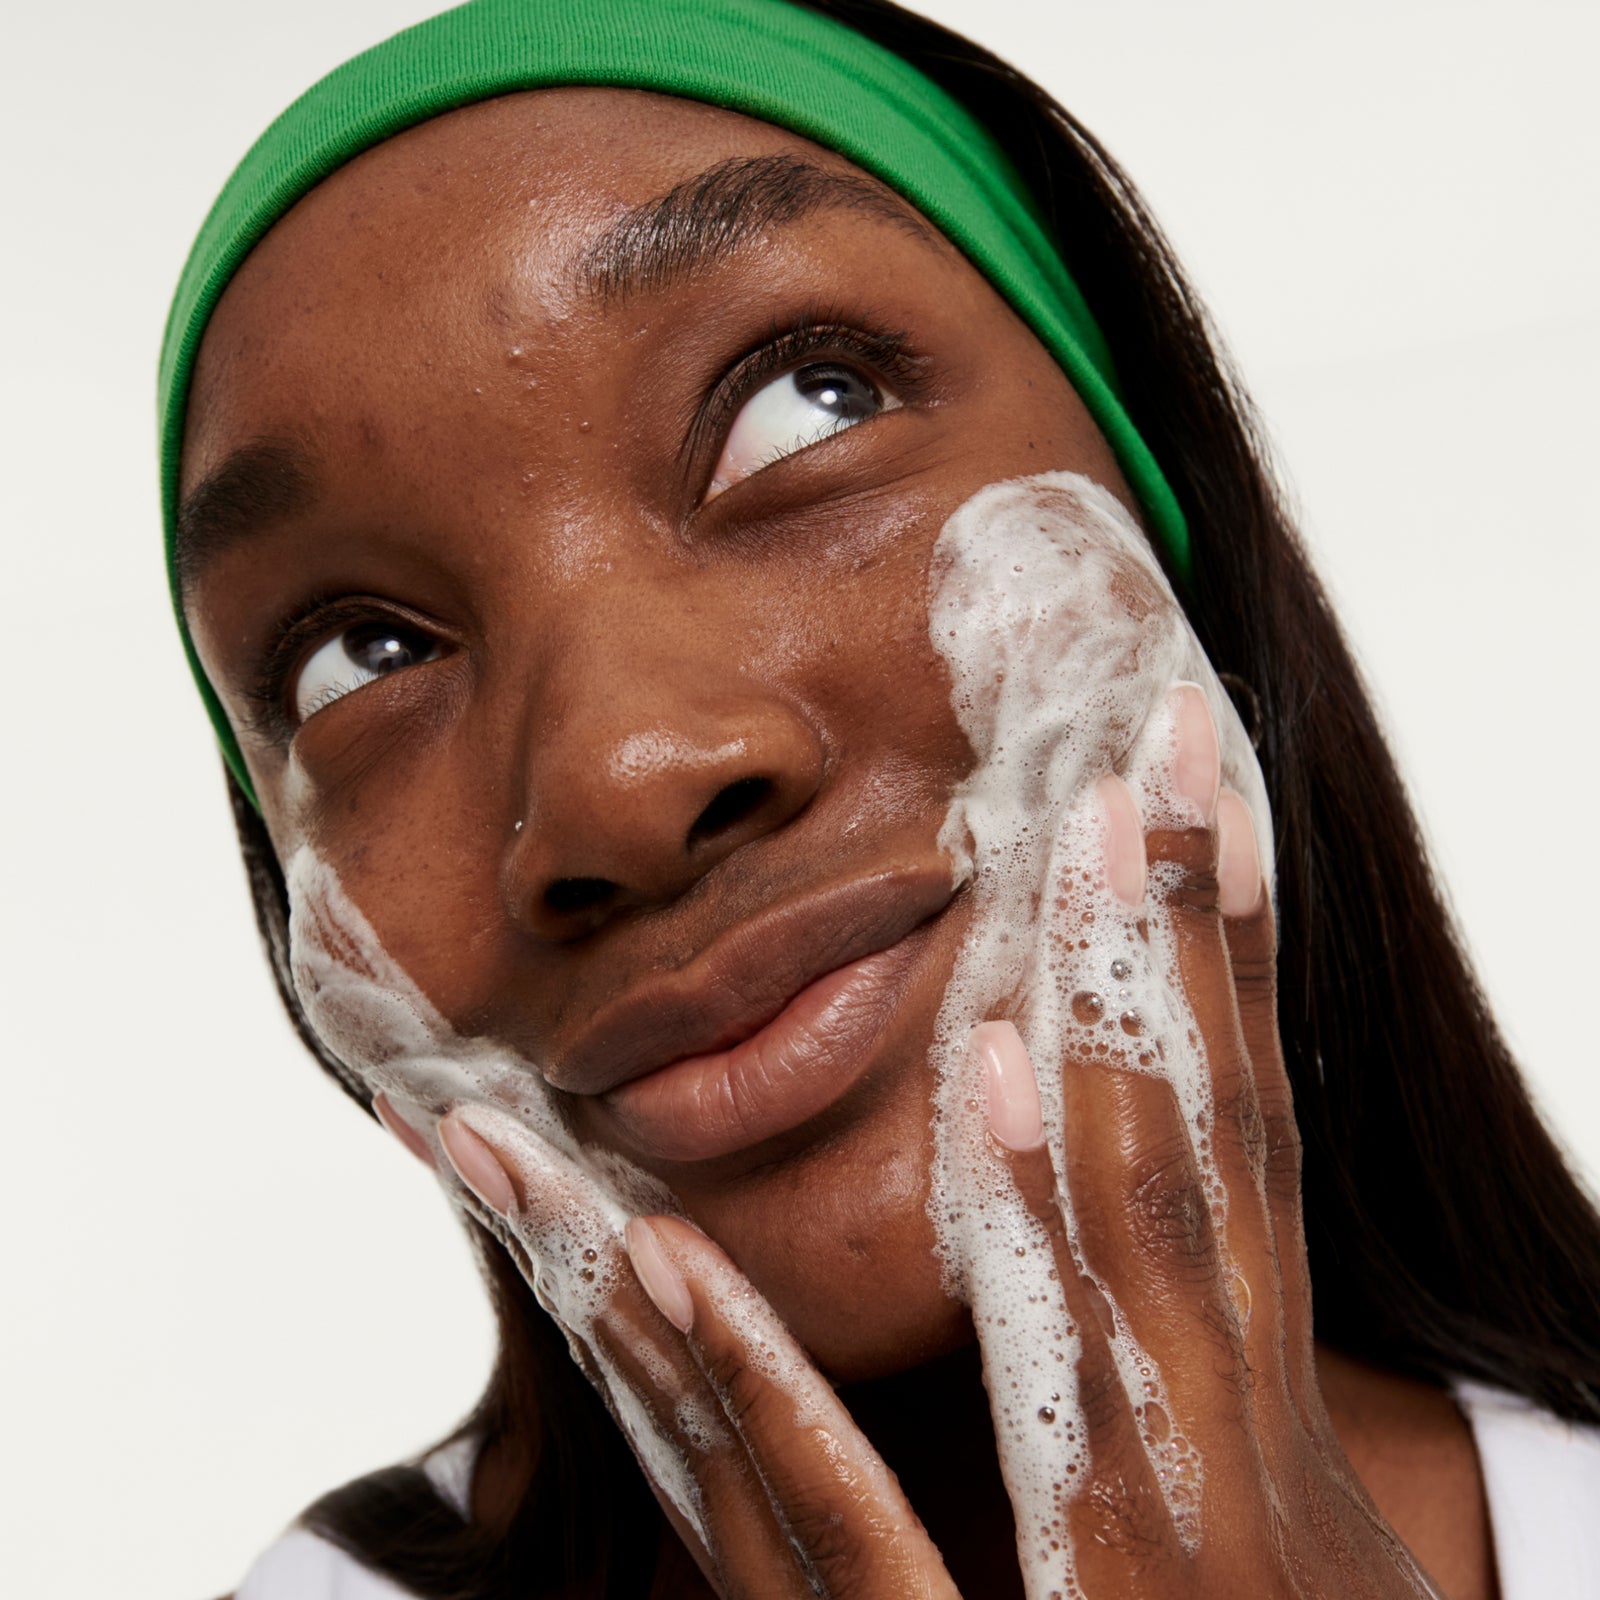 Woman washing her face with cleanser